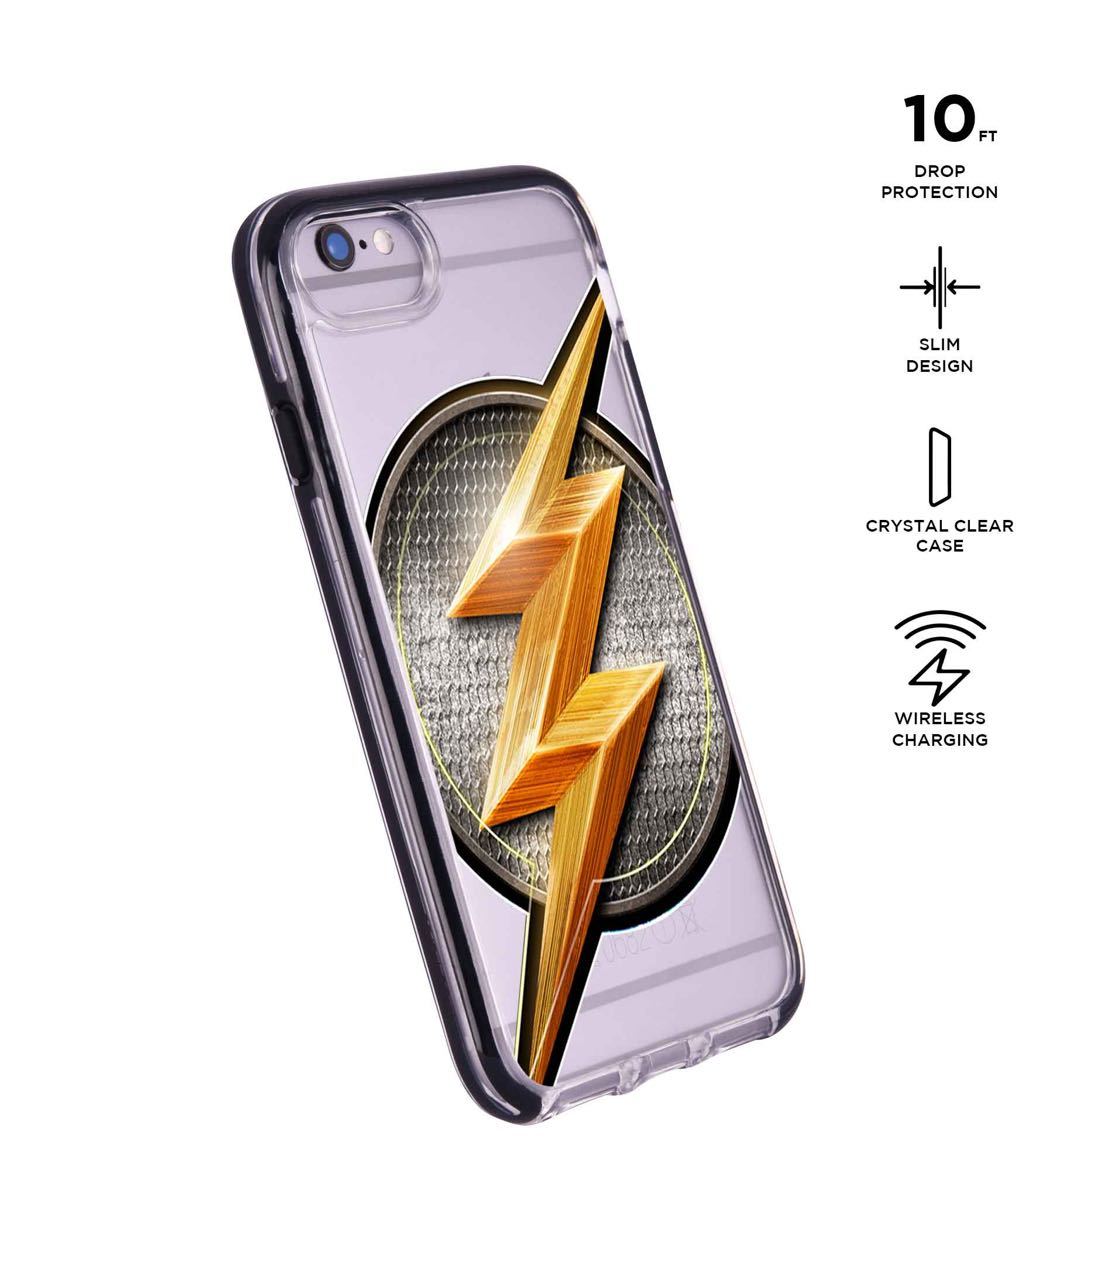 Flash Storm - Extreme Phone Case for iPhone 6S